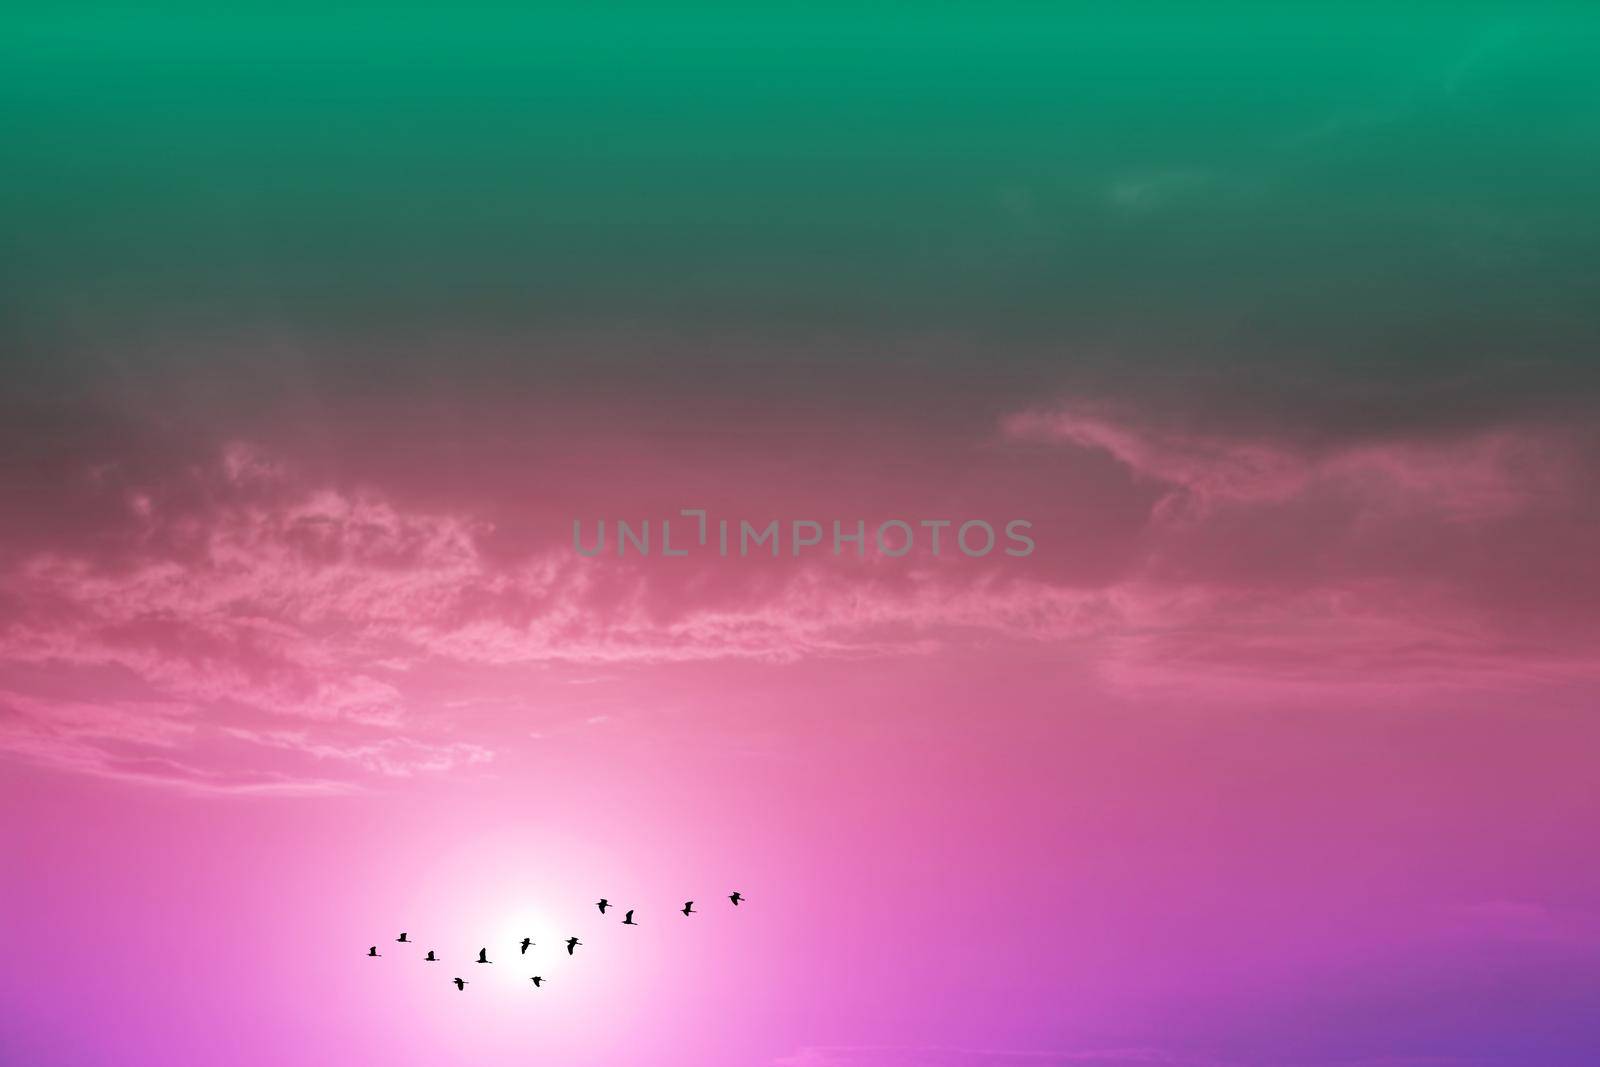 sunset on the evening purple pastel cloud on the sky and silhouette birds flying to home